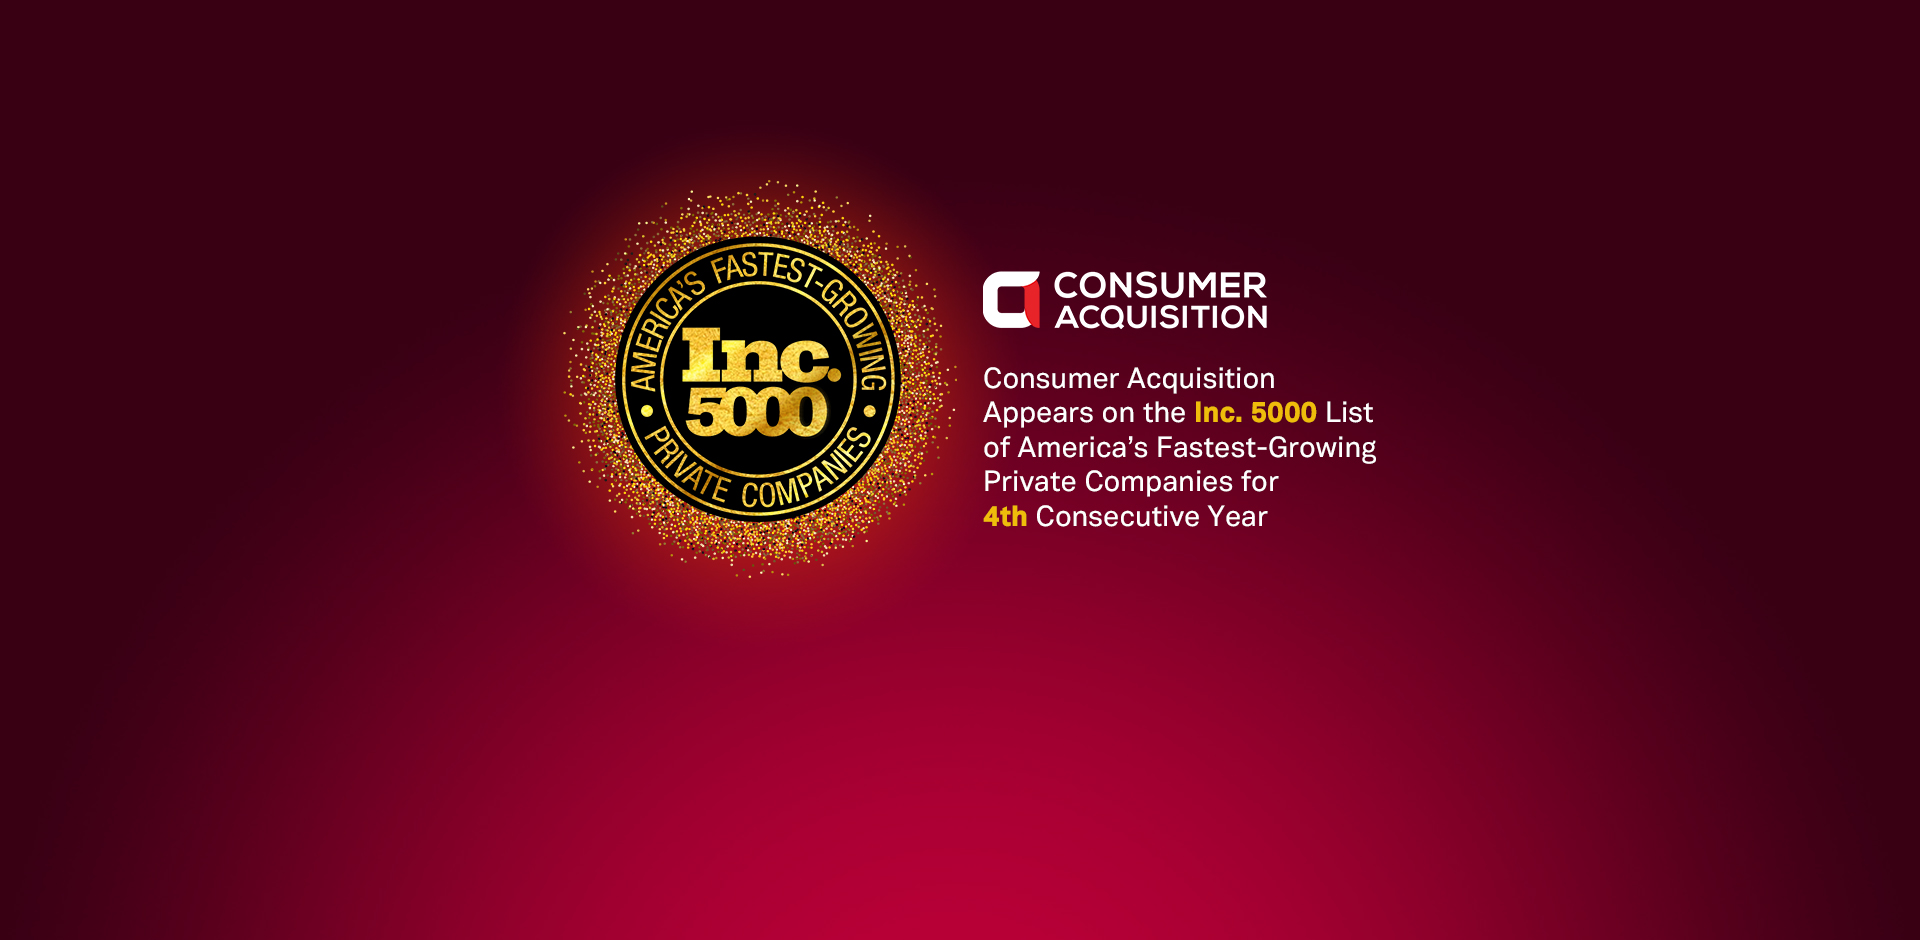 Consumer Acquisition Appears on the Inc. 5000 List of America’s Fastest-Growing Private Companies for 4th Consecutive Year